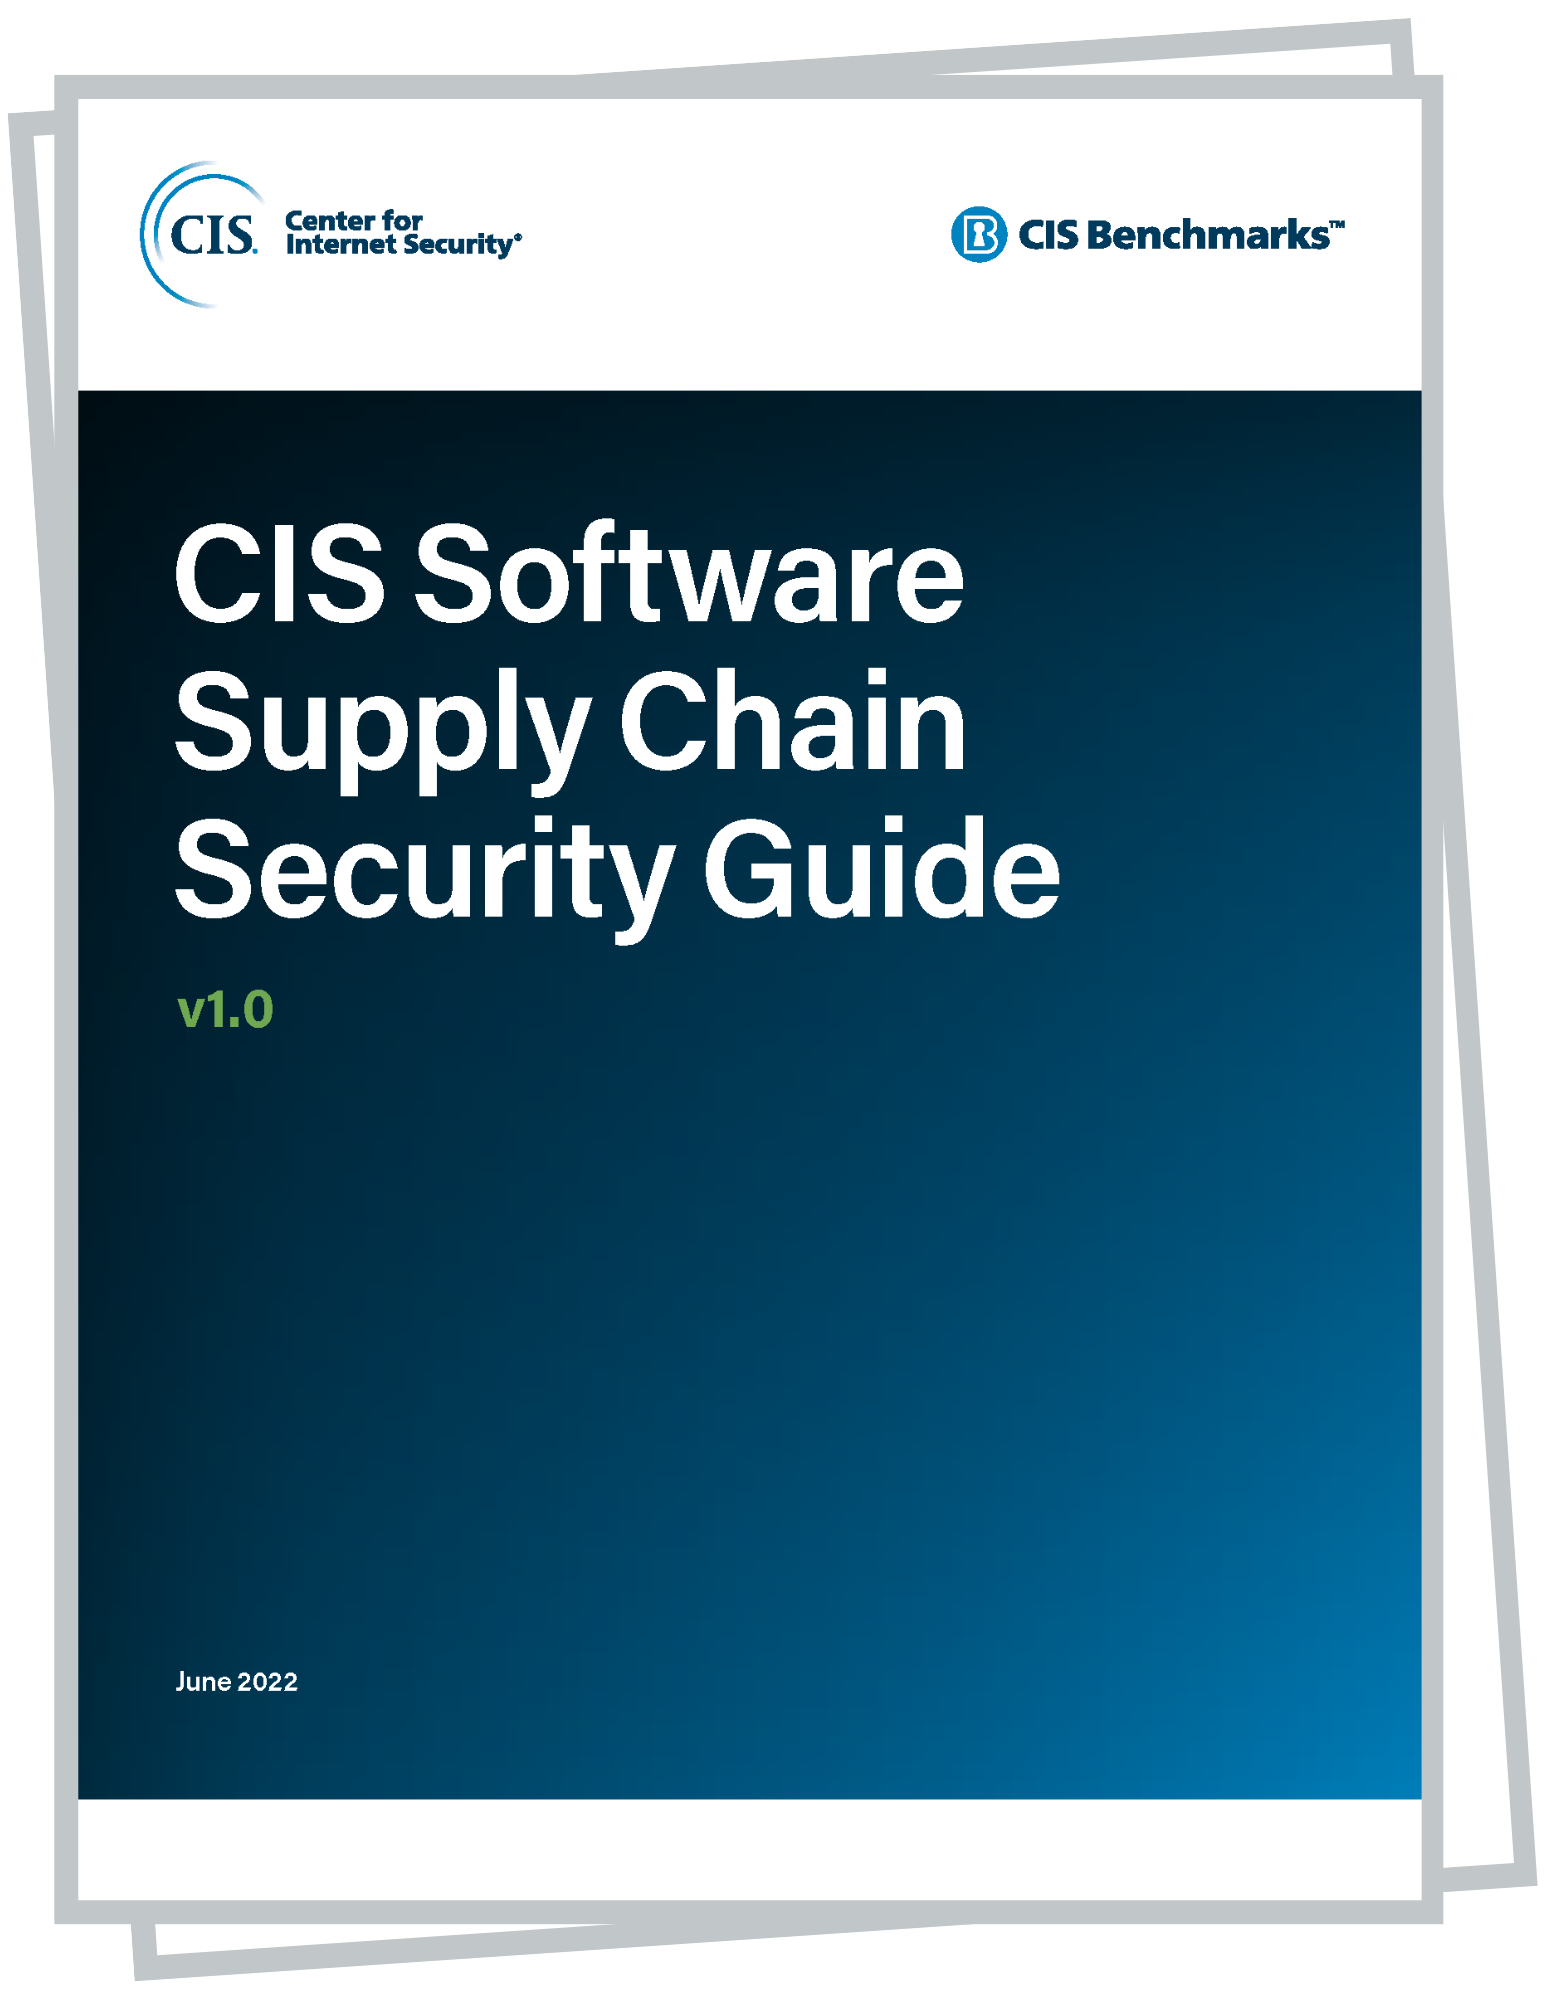 CIS Controls v8 Mapping  to PCI DSS 40 cover